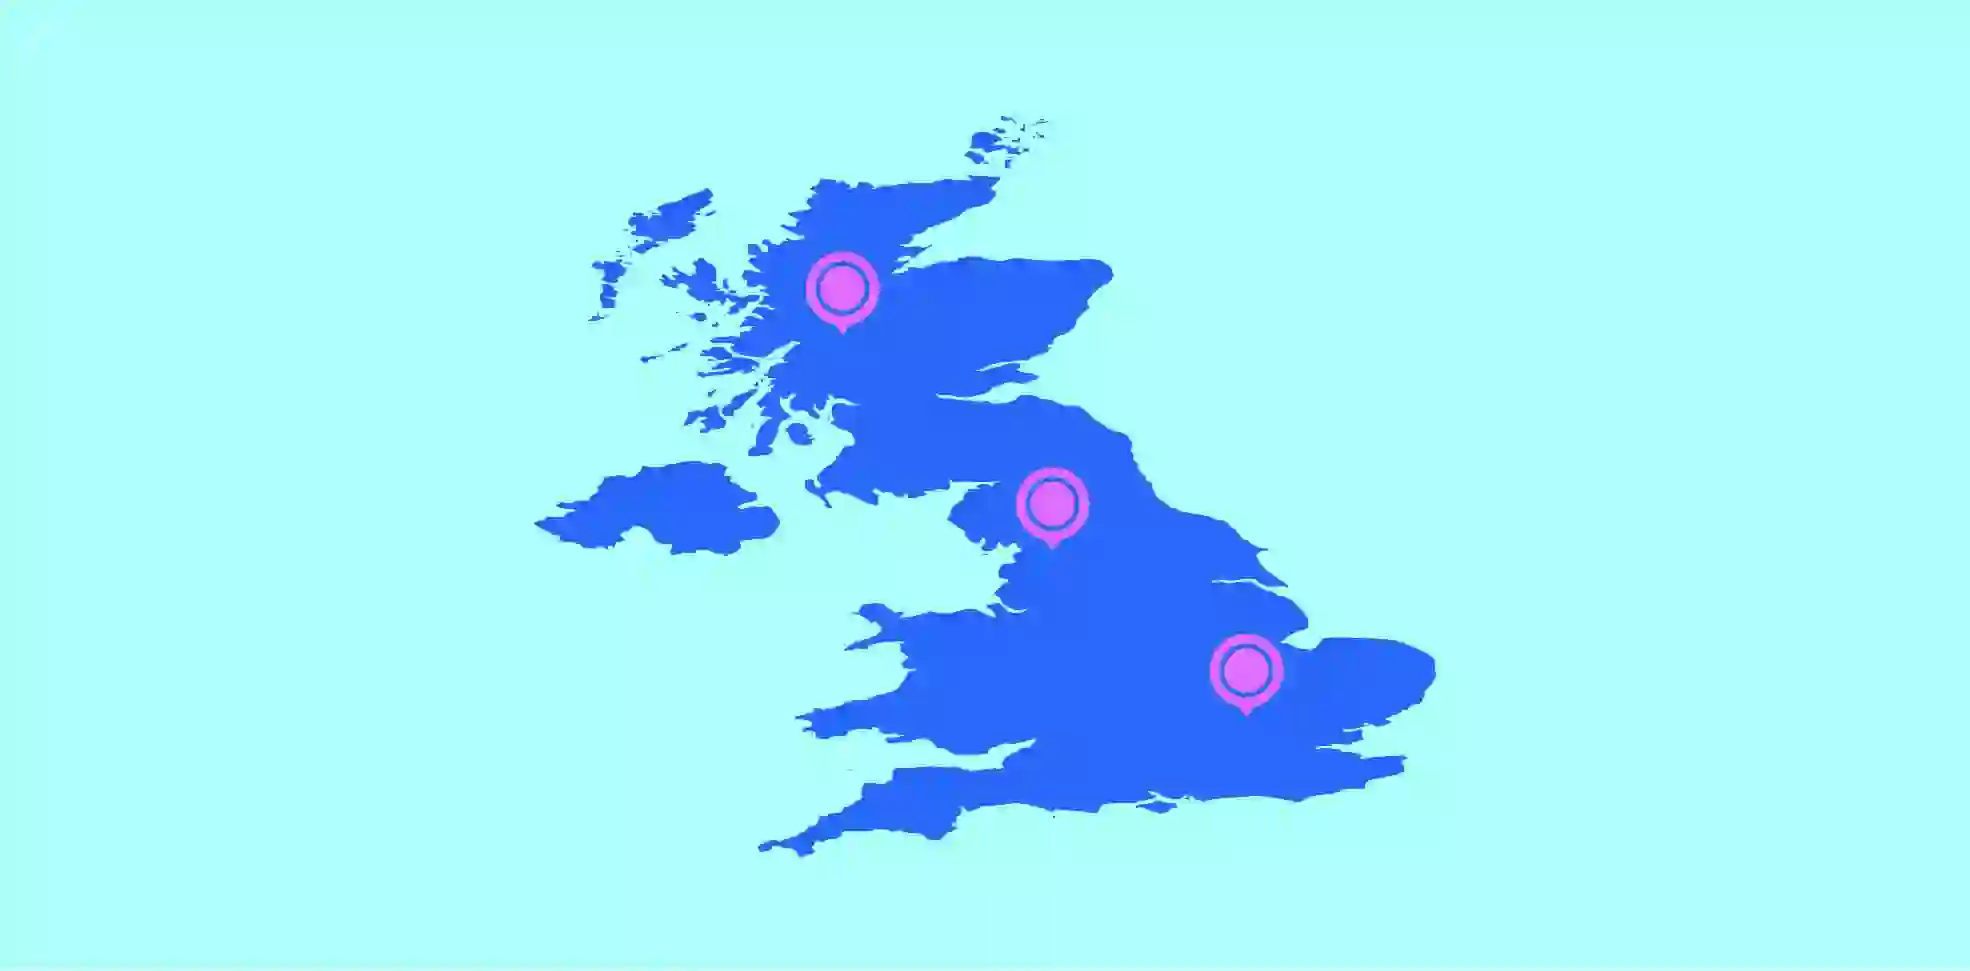 blue silhouette of the UK on aqua background